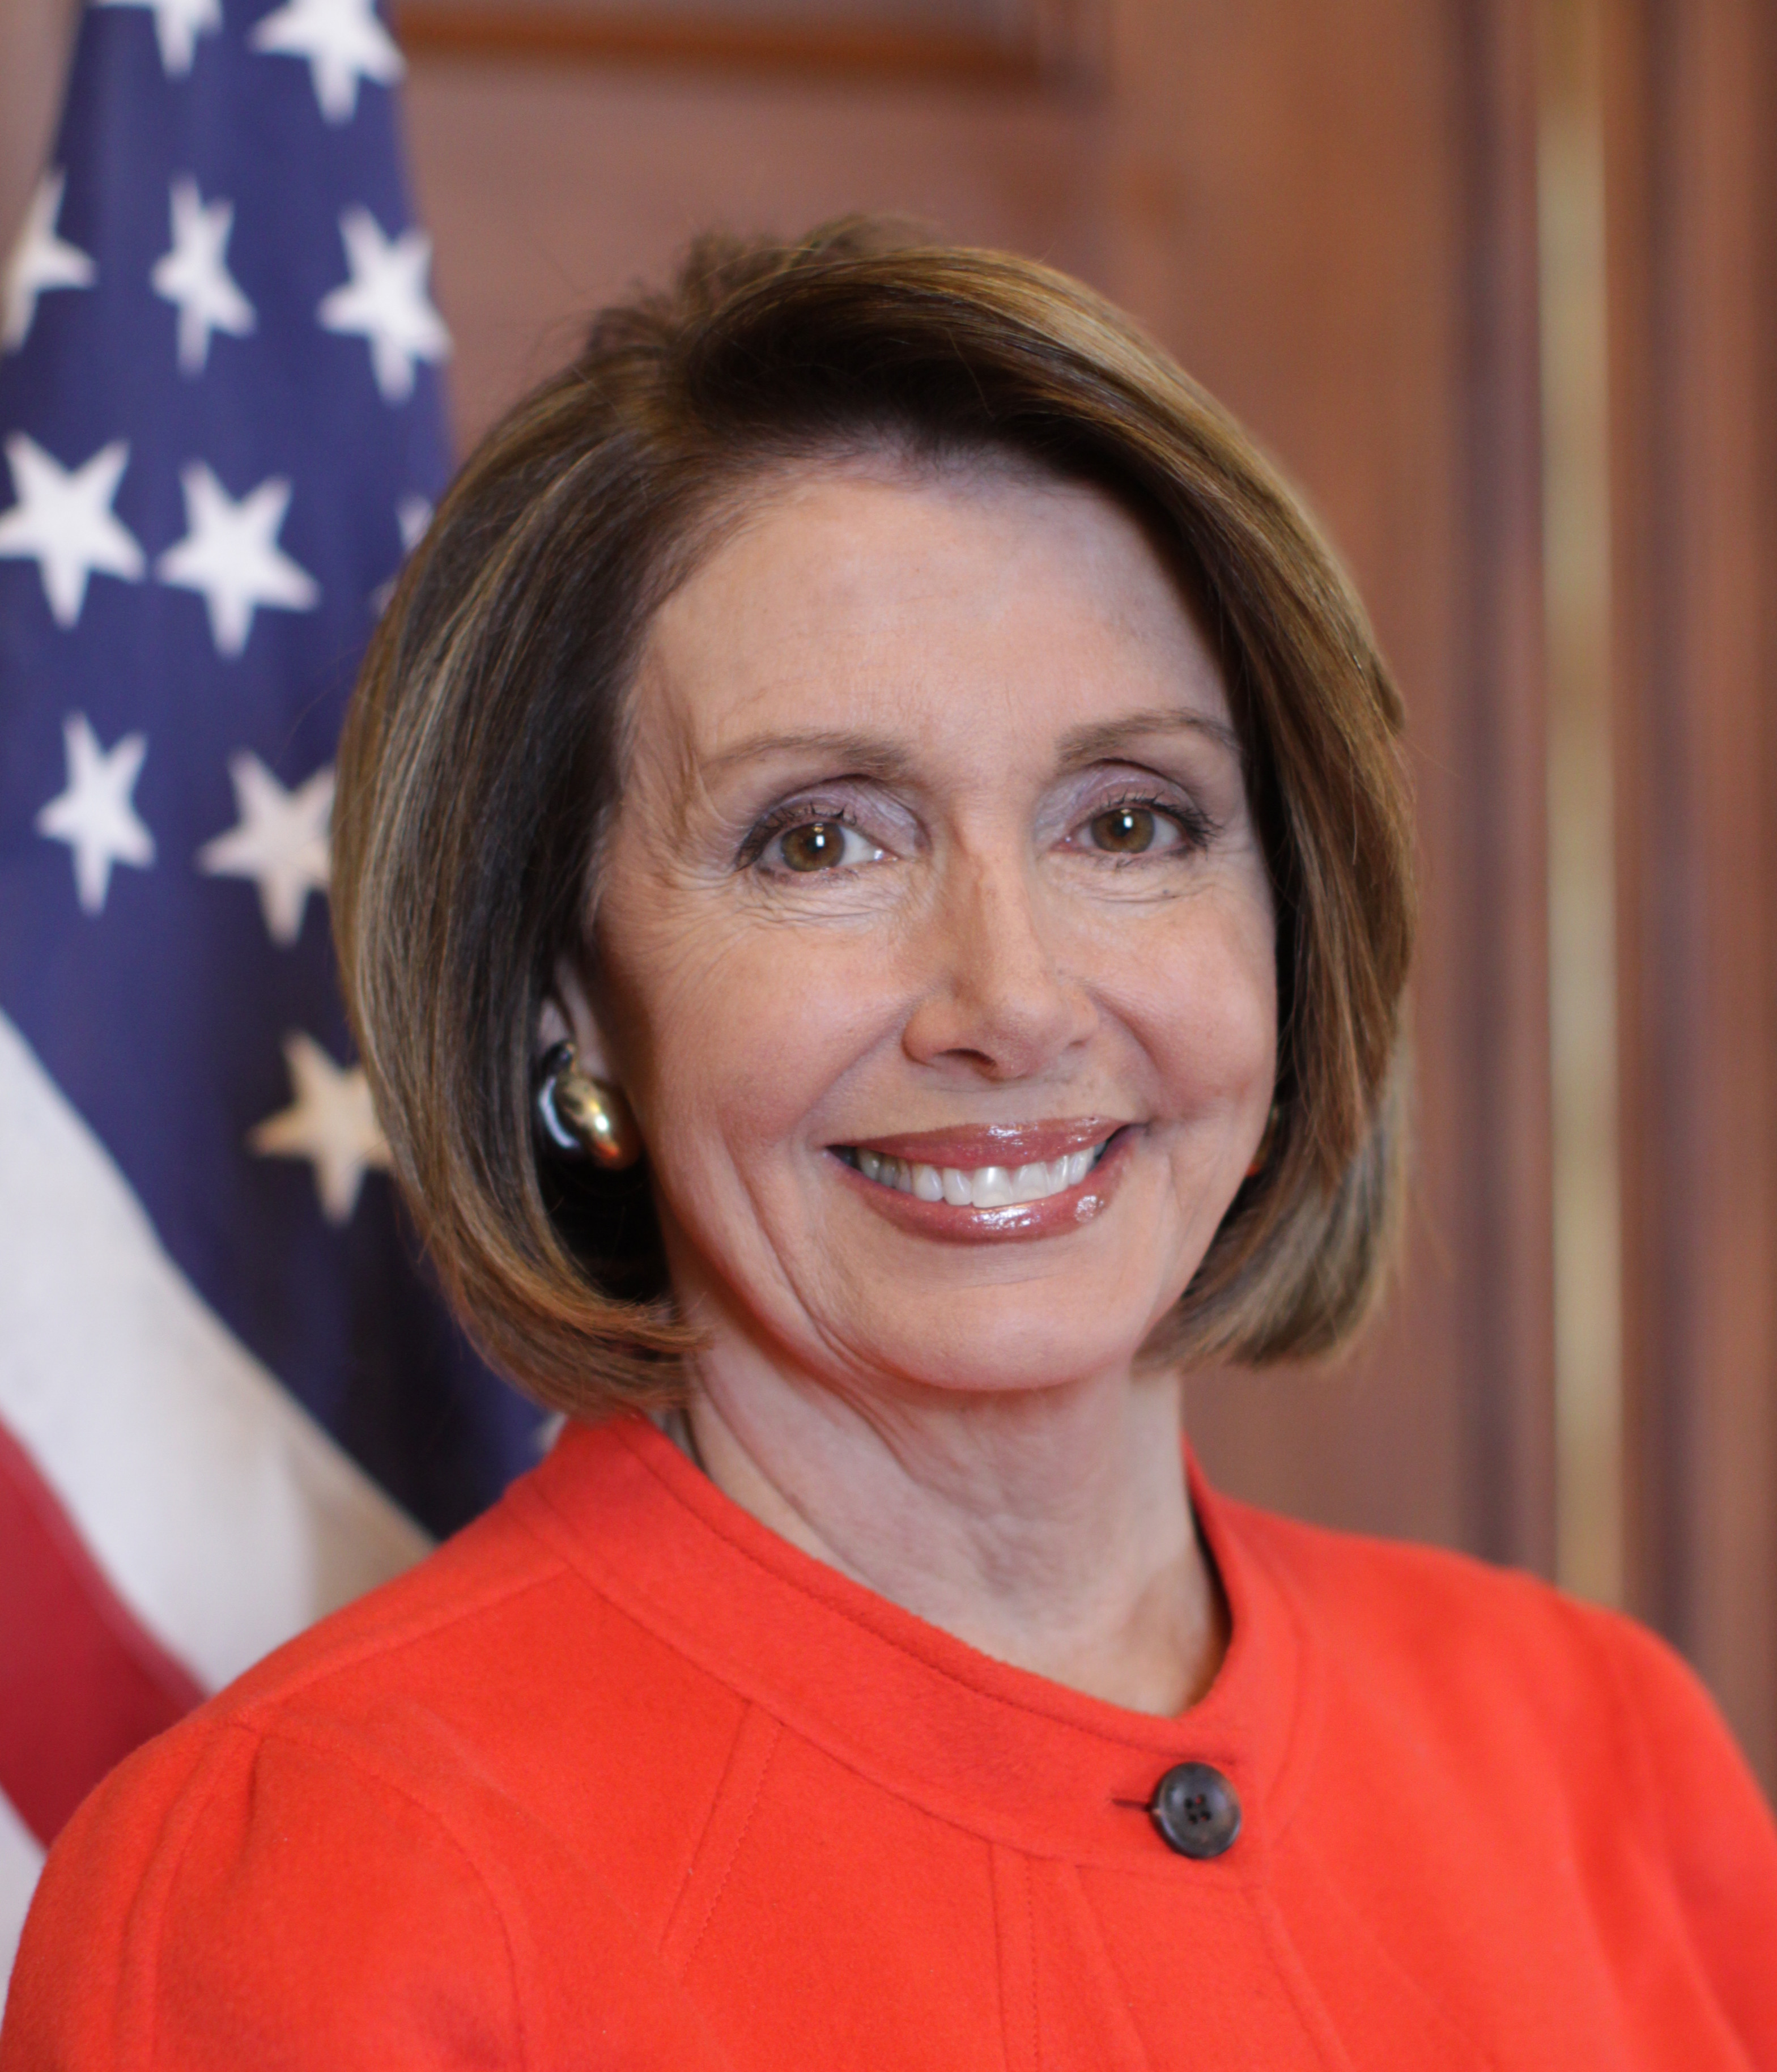 Pelosi plans to stay, reasses Democratic prospects in midterms